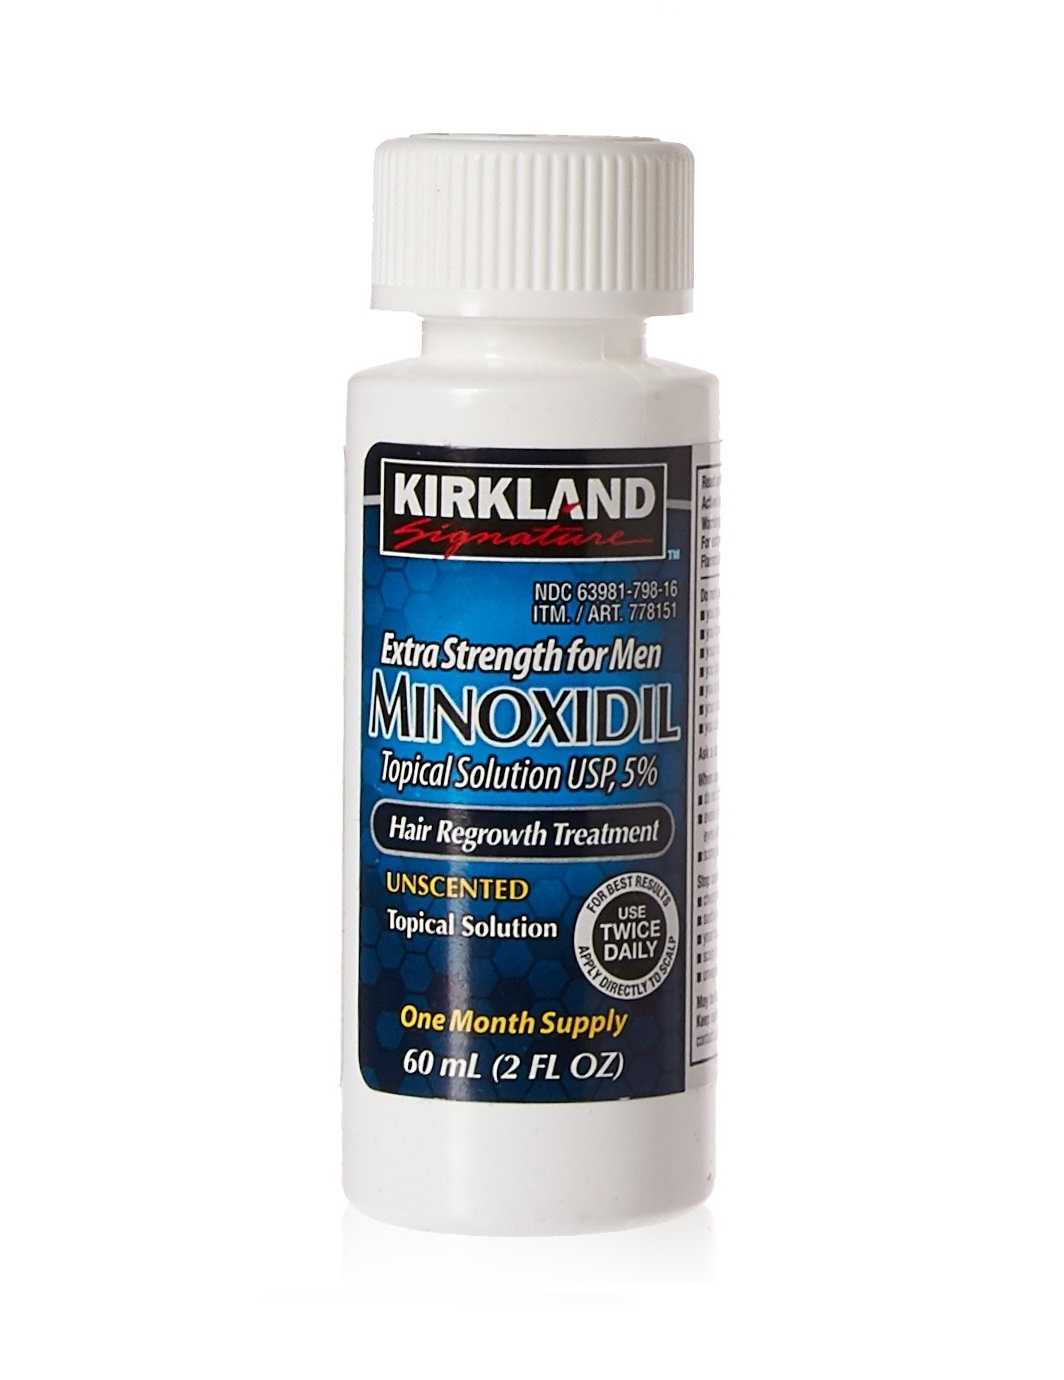 Is Minoxidil The Best Hair Loss Treatment, How To Make It More Effective